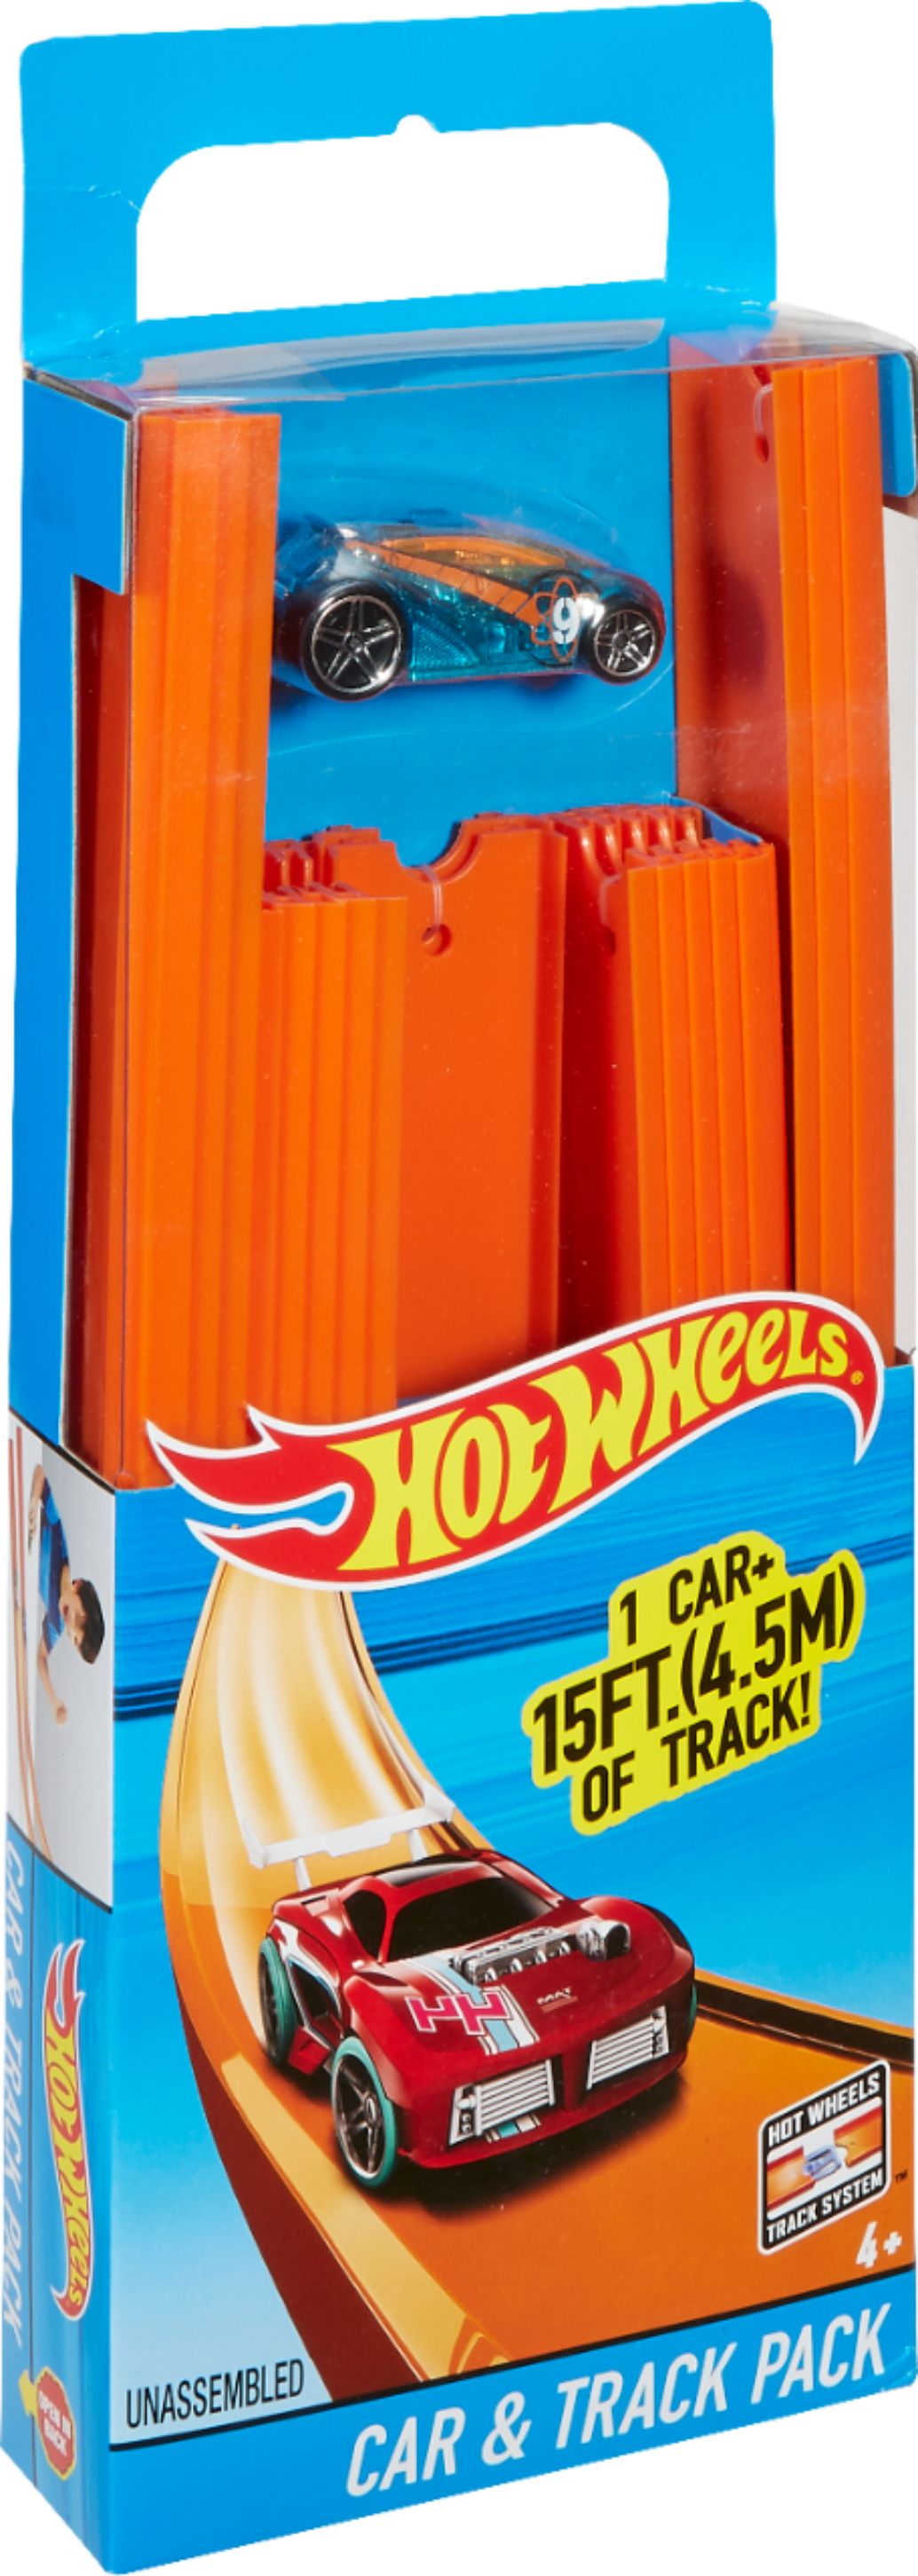 hot wheels track builder straight track with car